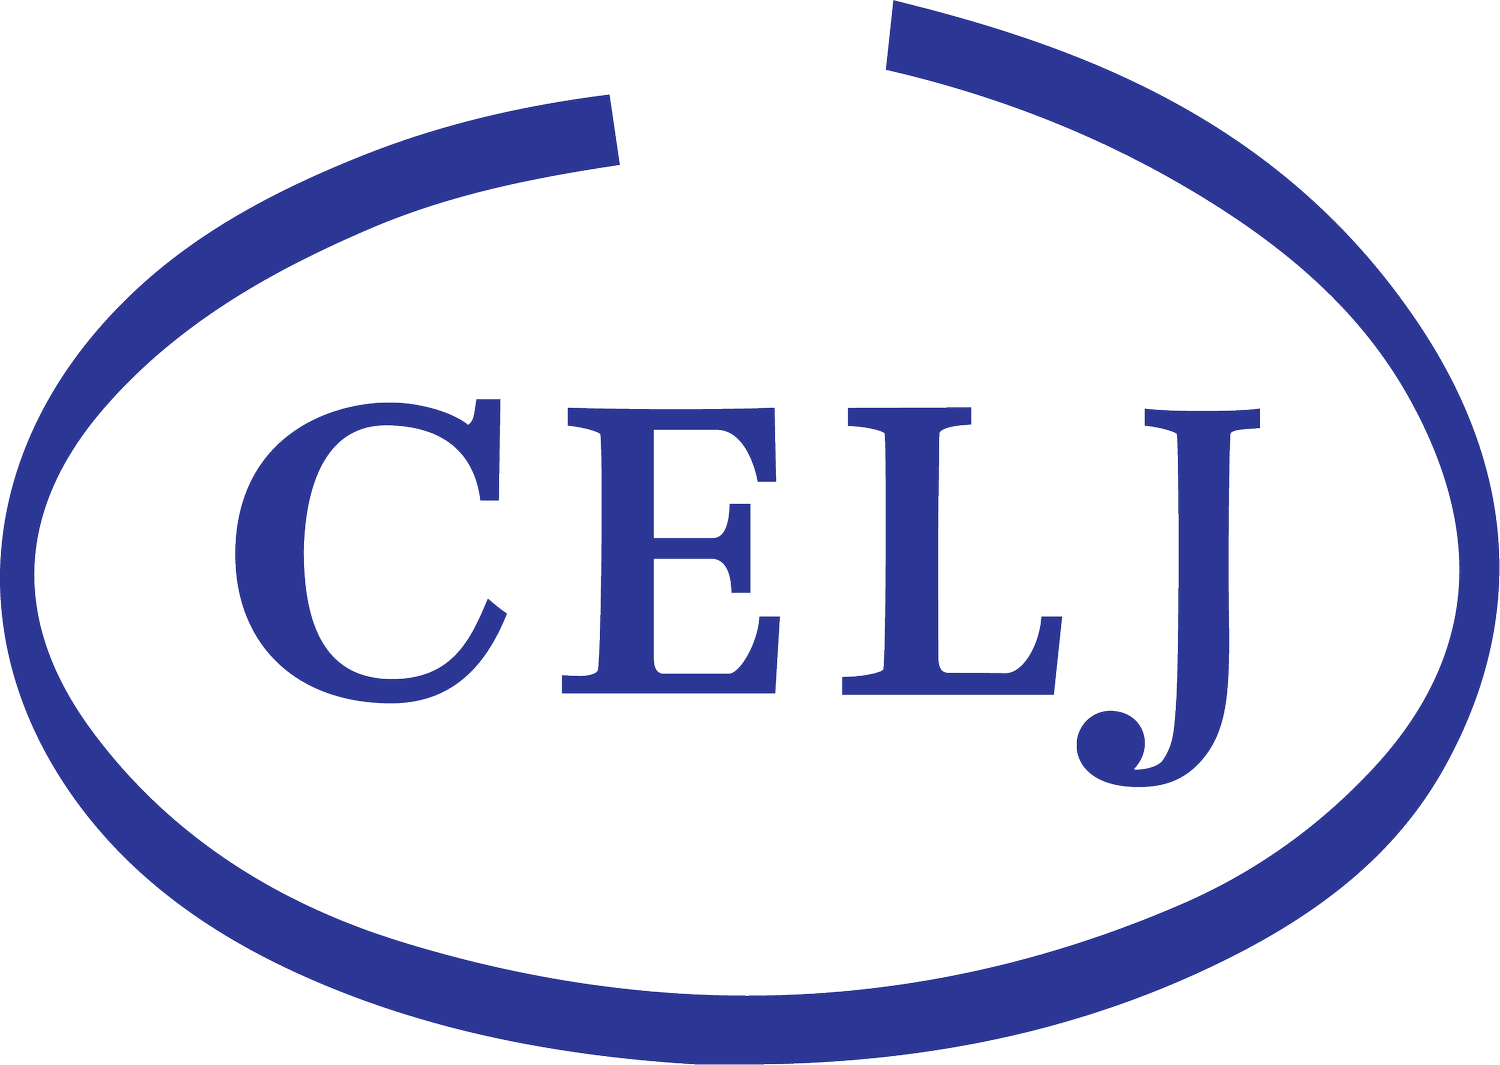 Council of Editors of Learned Journals